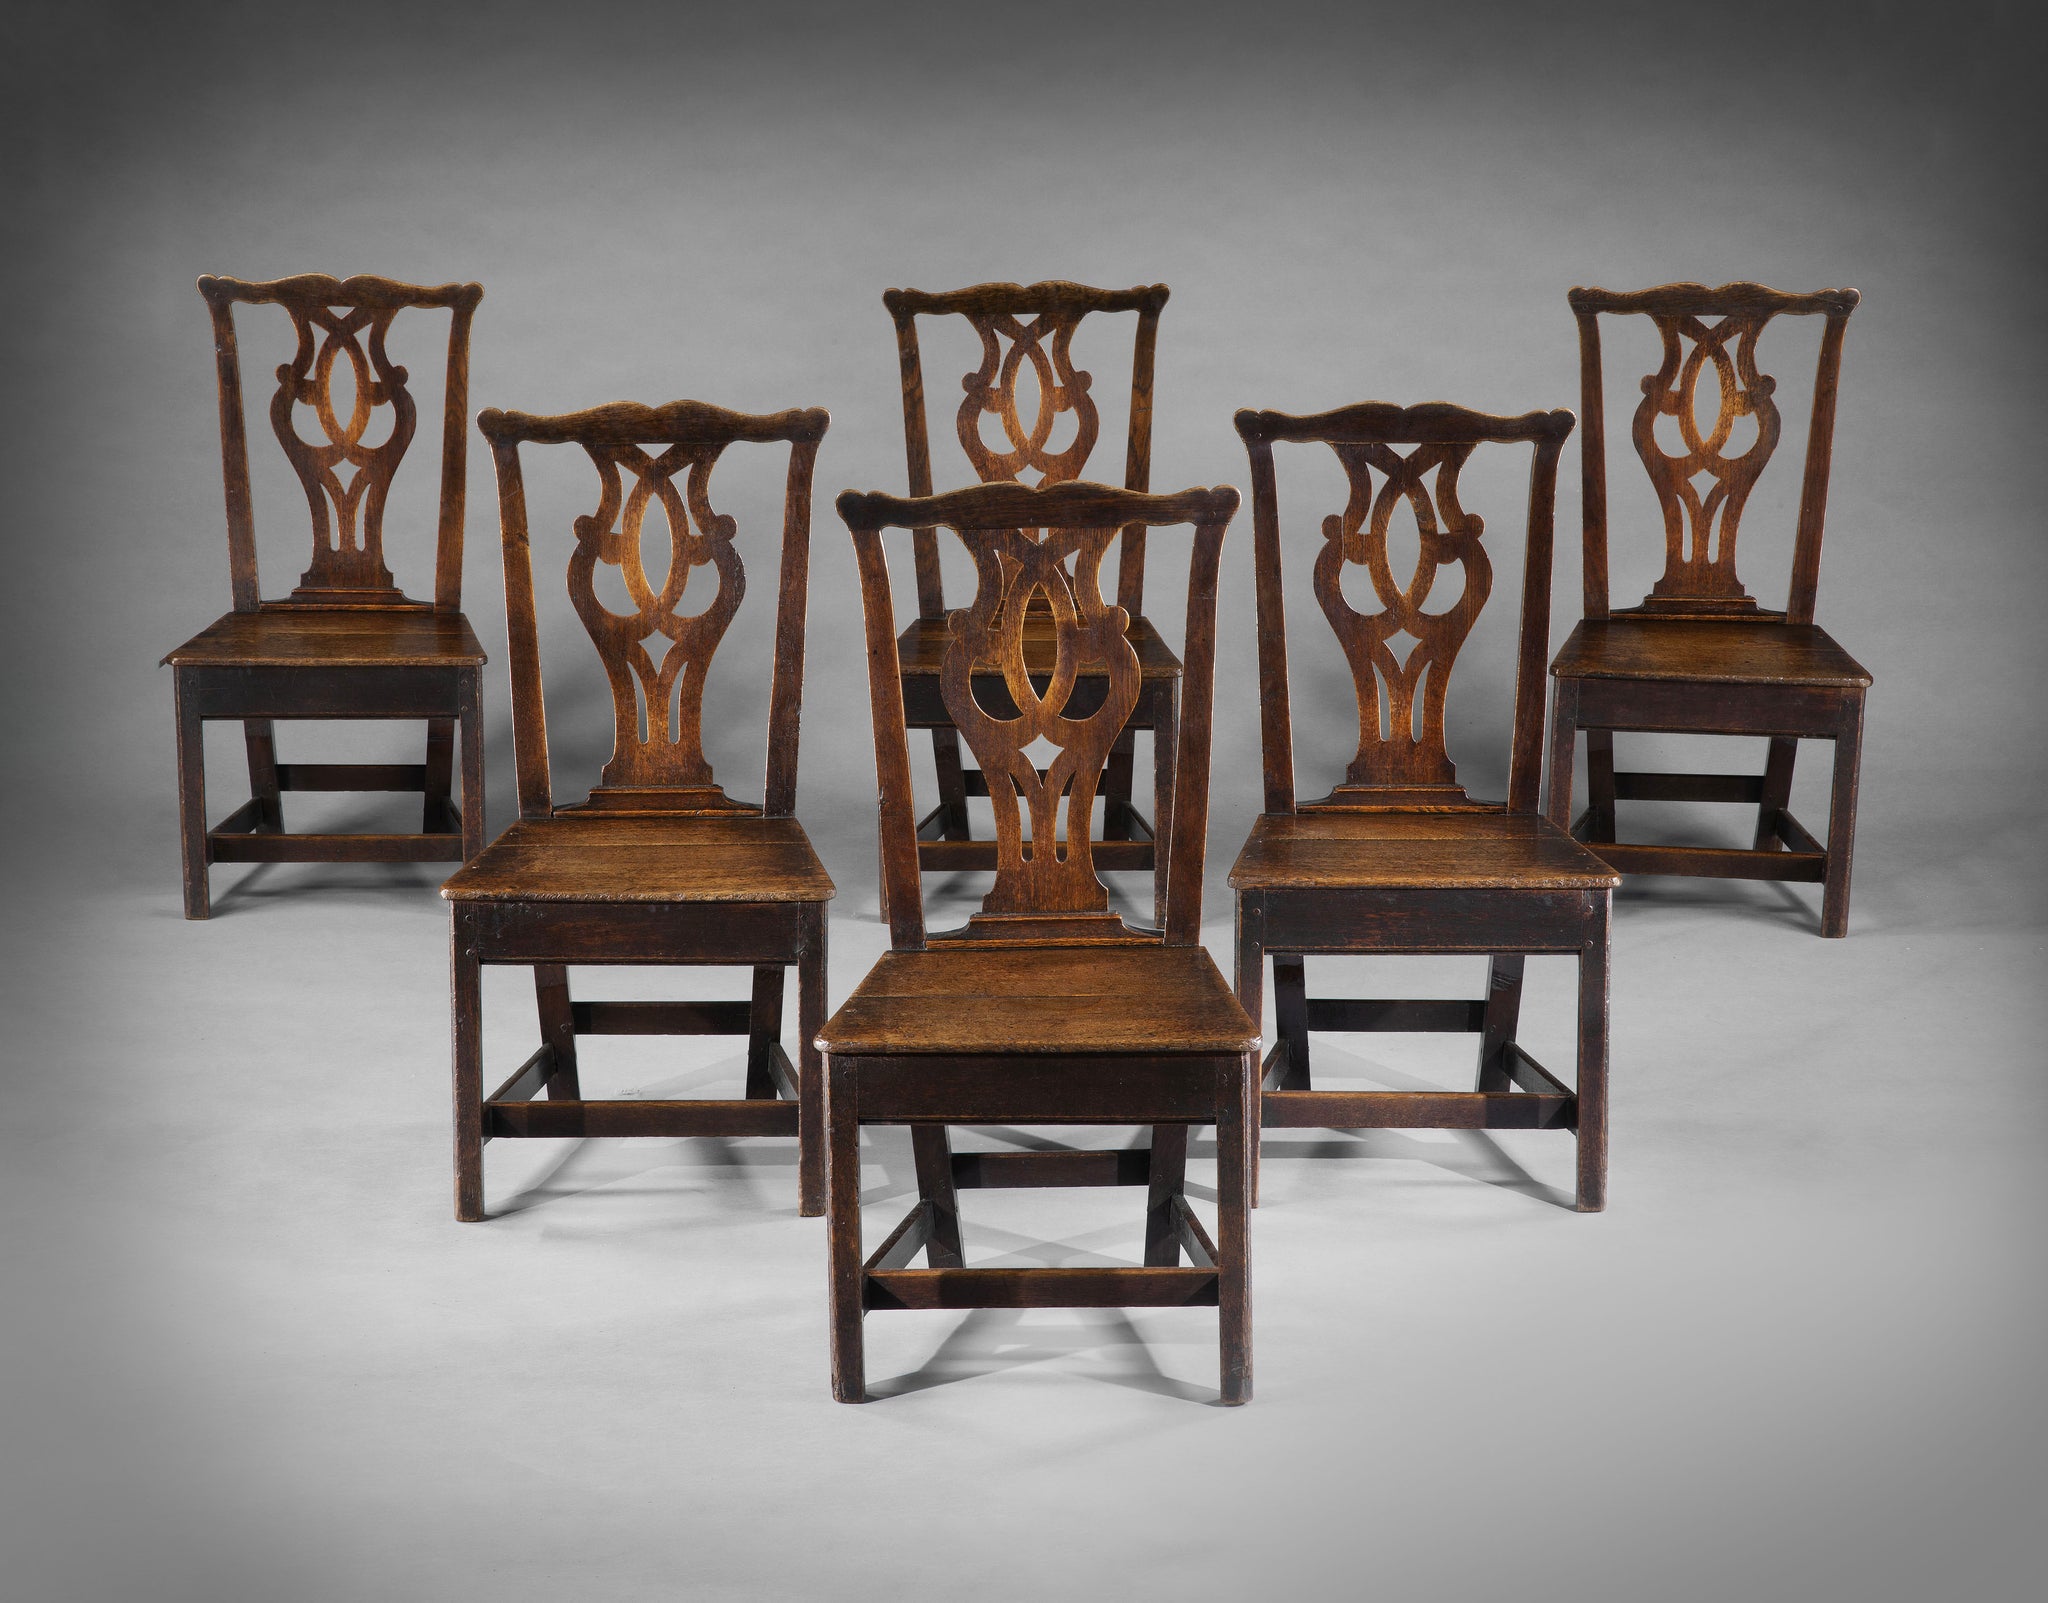 A Striking Set of Six "Country Chippendale" Chairs